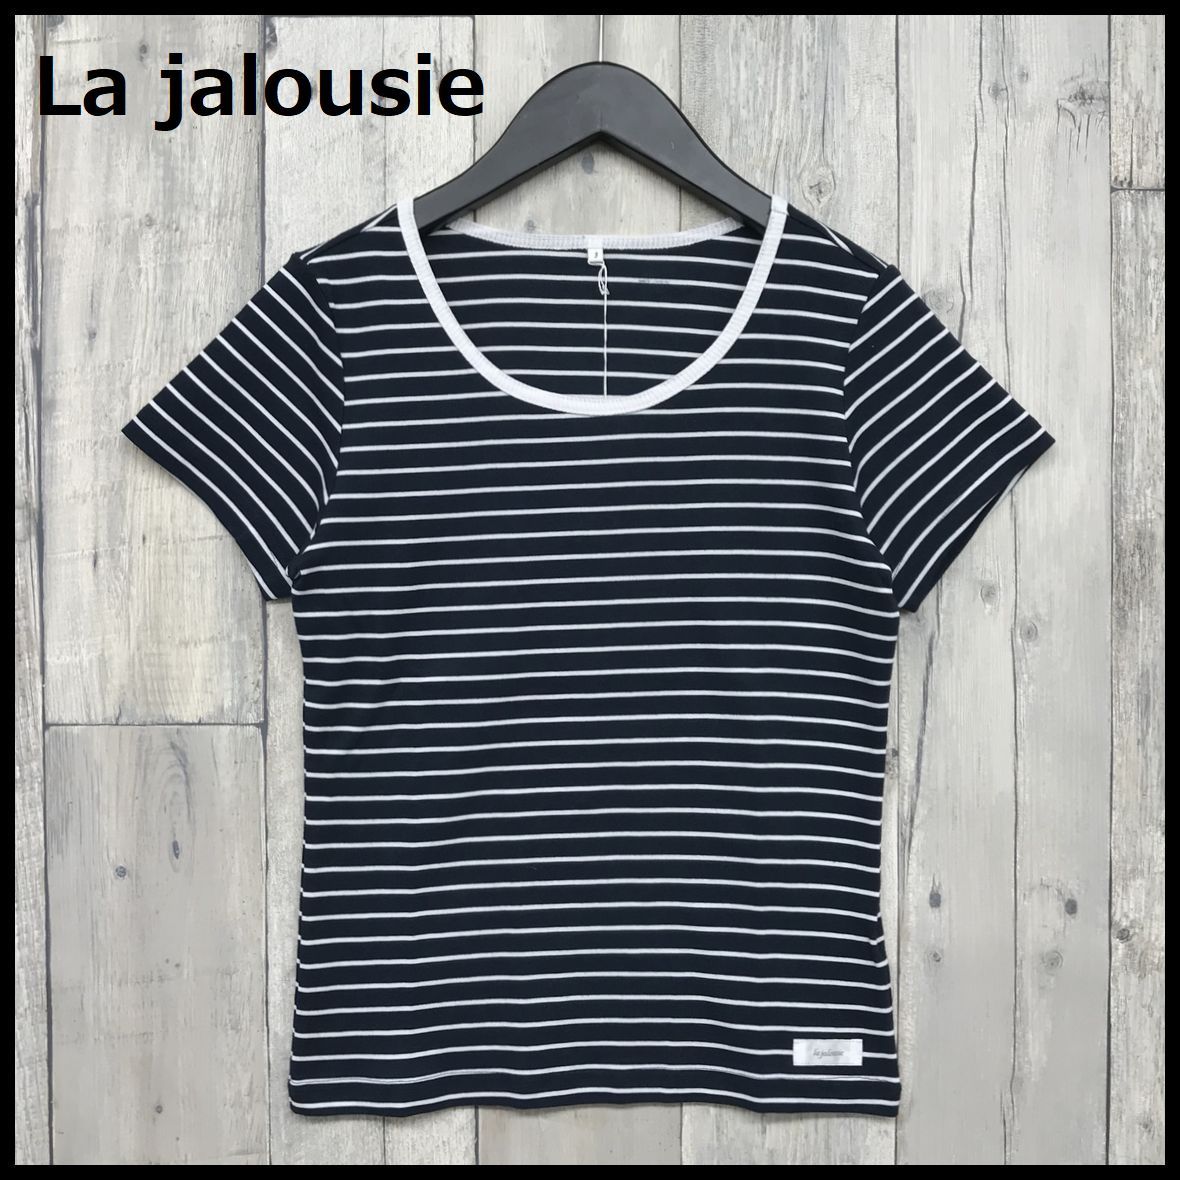  unused goods tag attaching la jalousiejelasi- Logo badge embroidery border total pattern T-shirt cut and sewn navy white 3